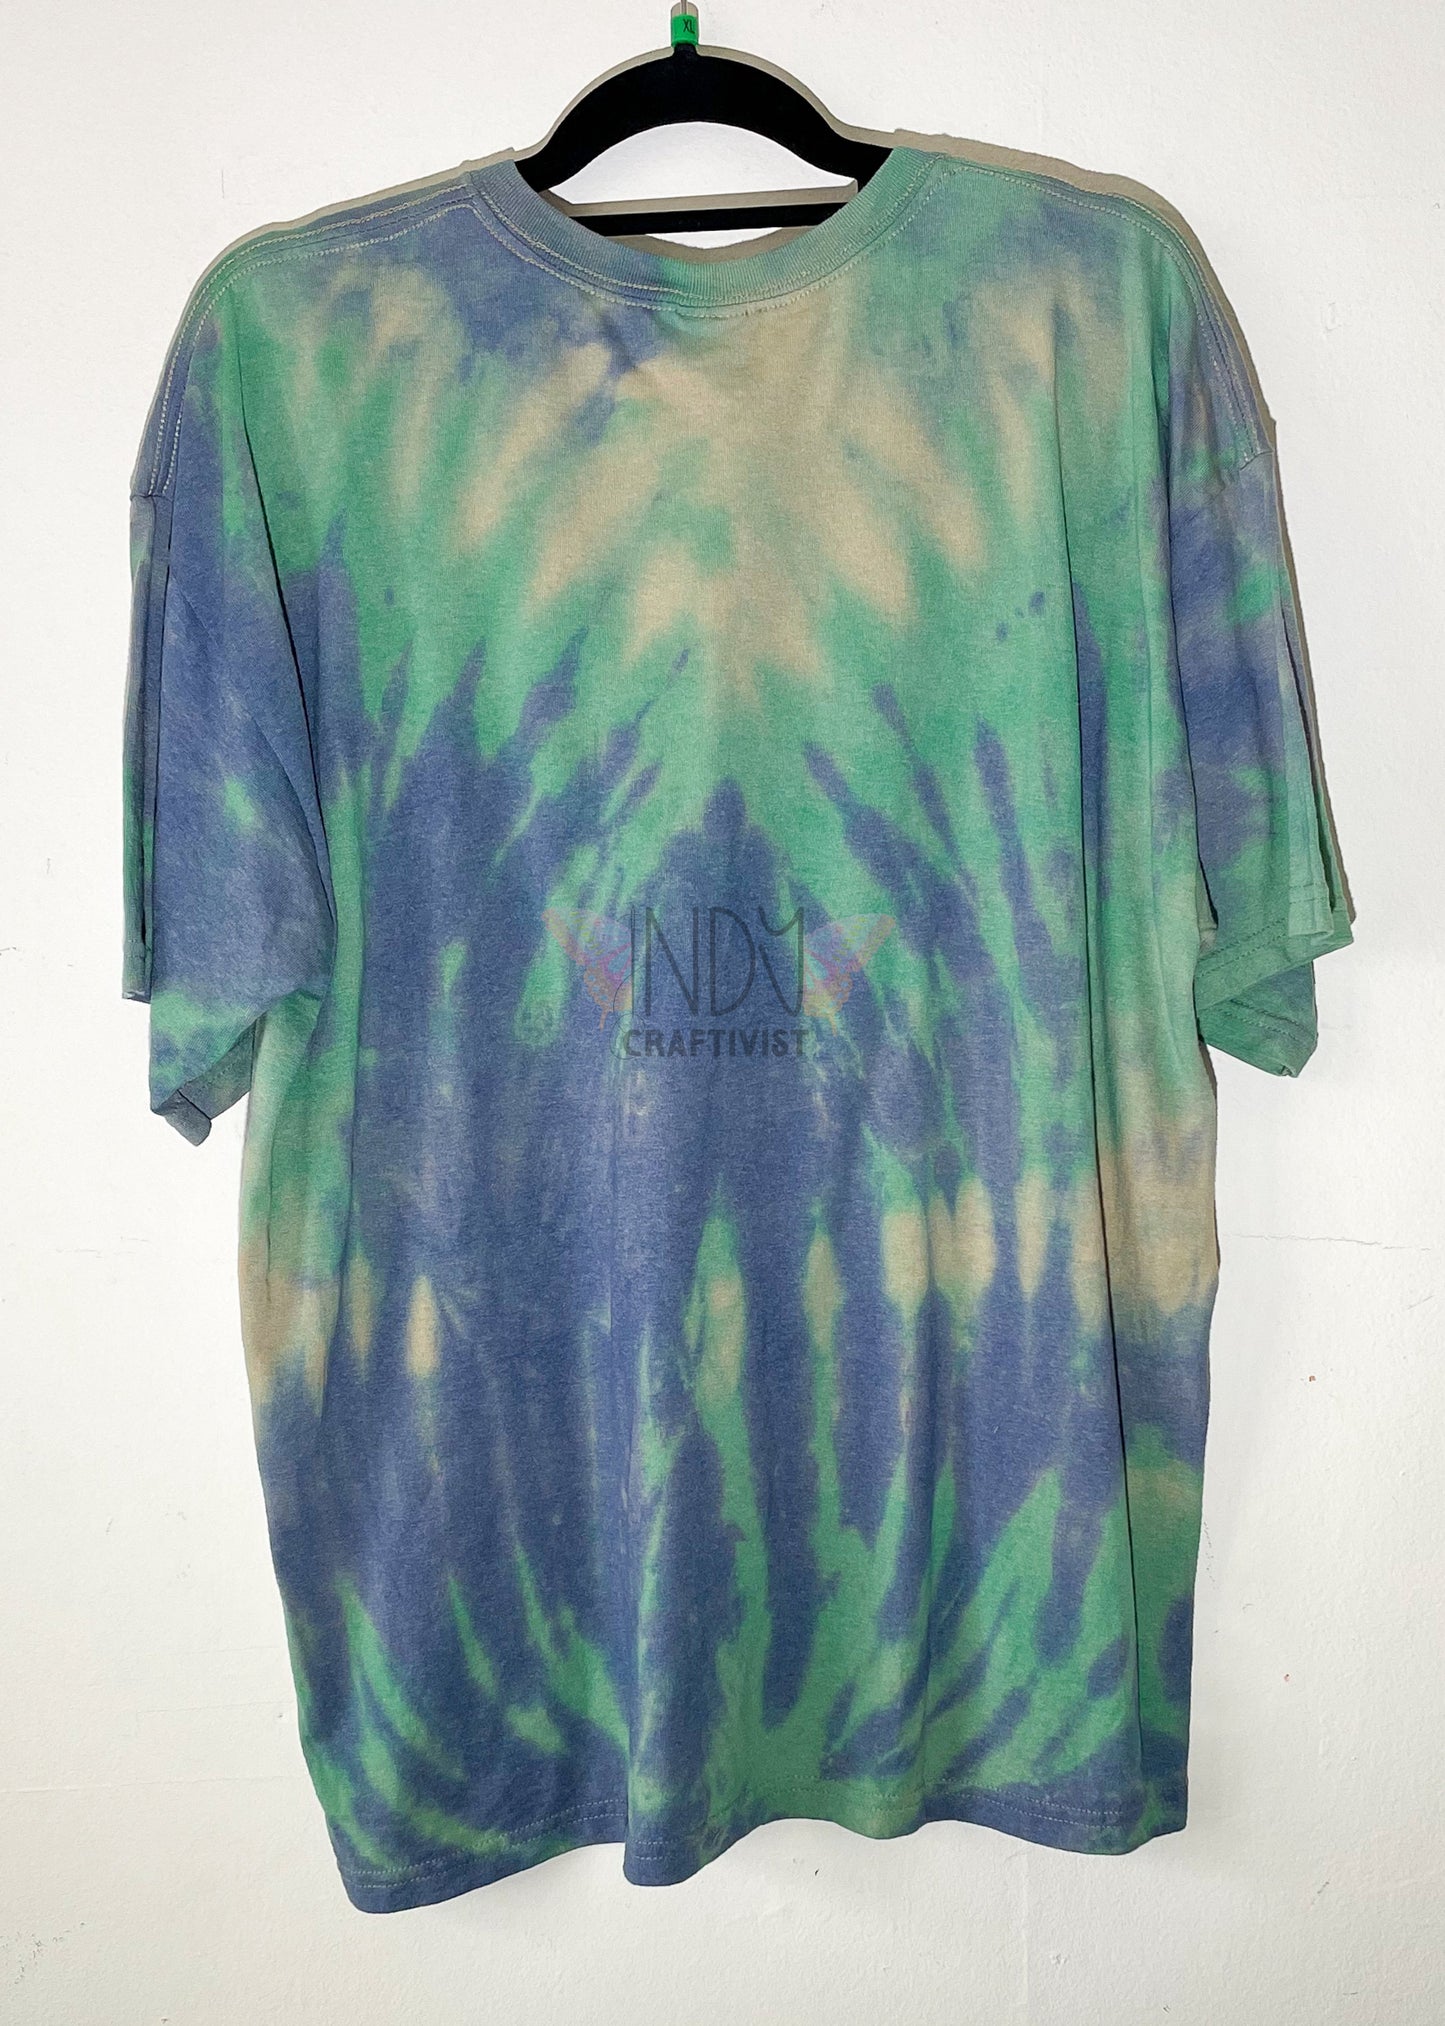 Blue and Green Extra Large 50/50 Tie Dye T-shirt